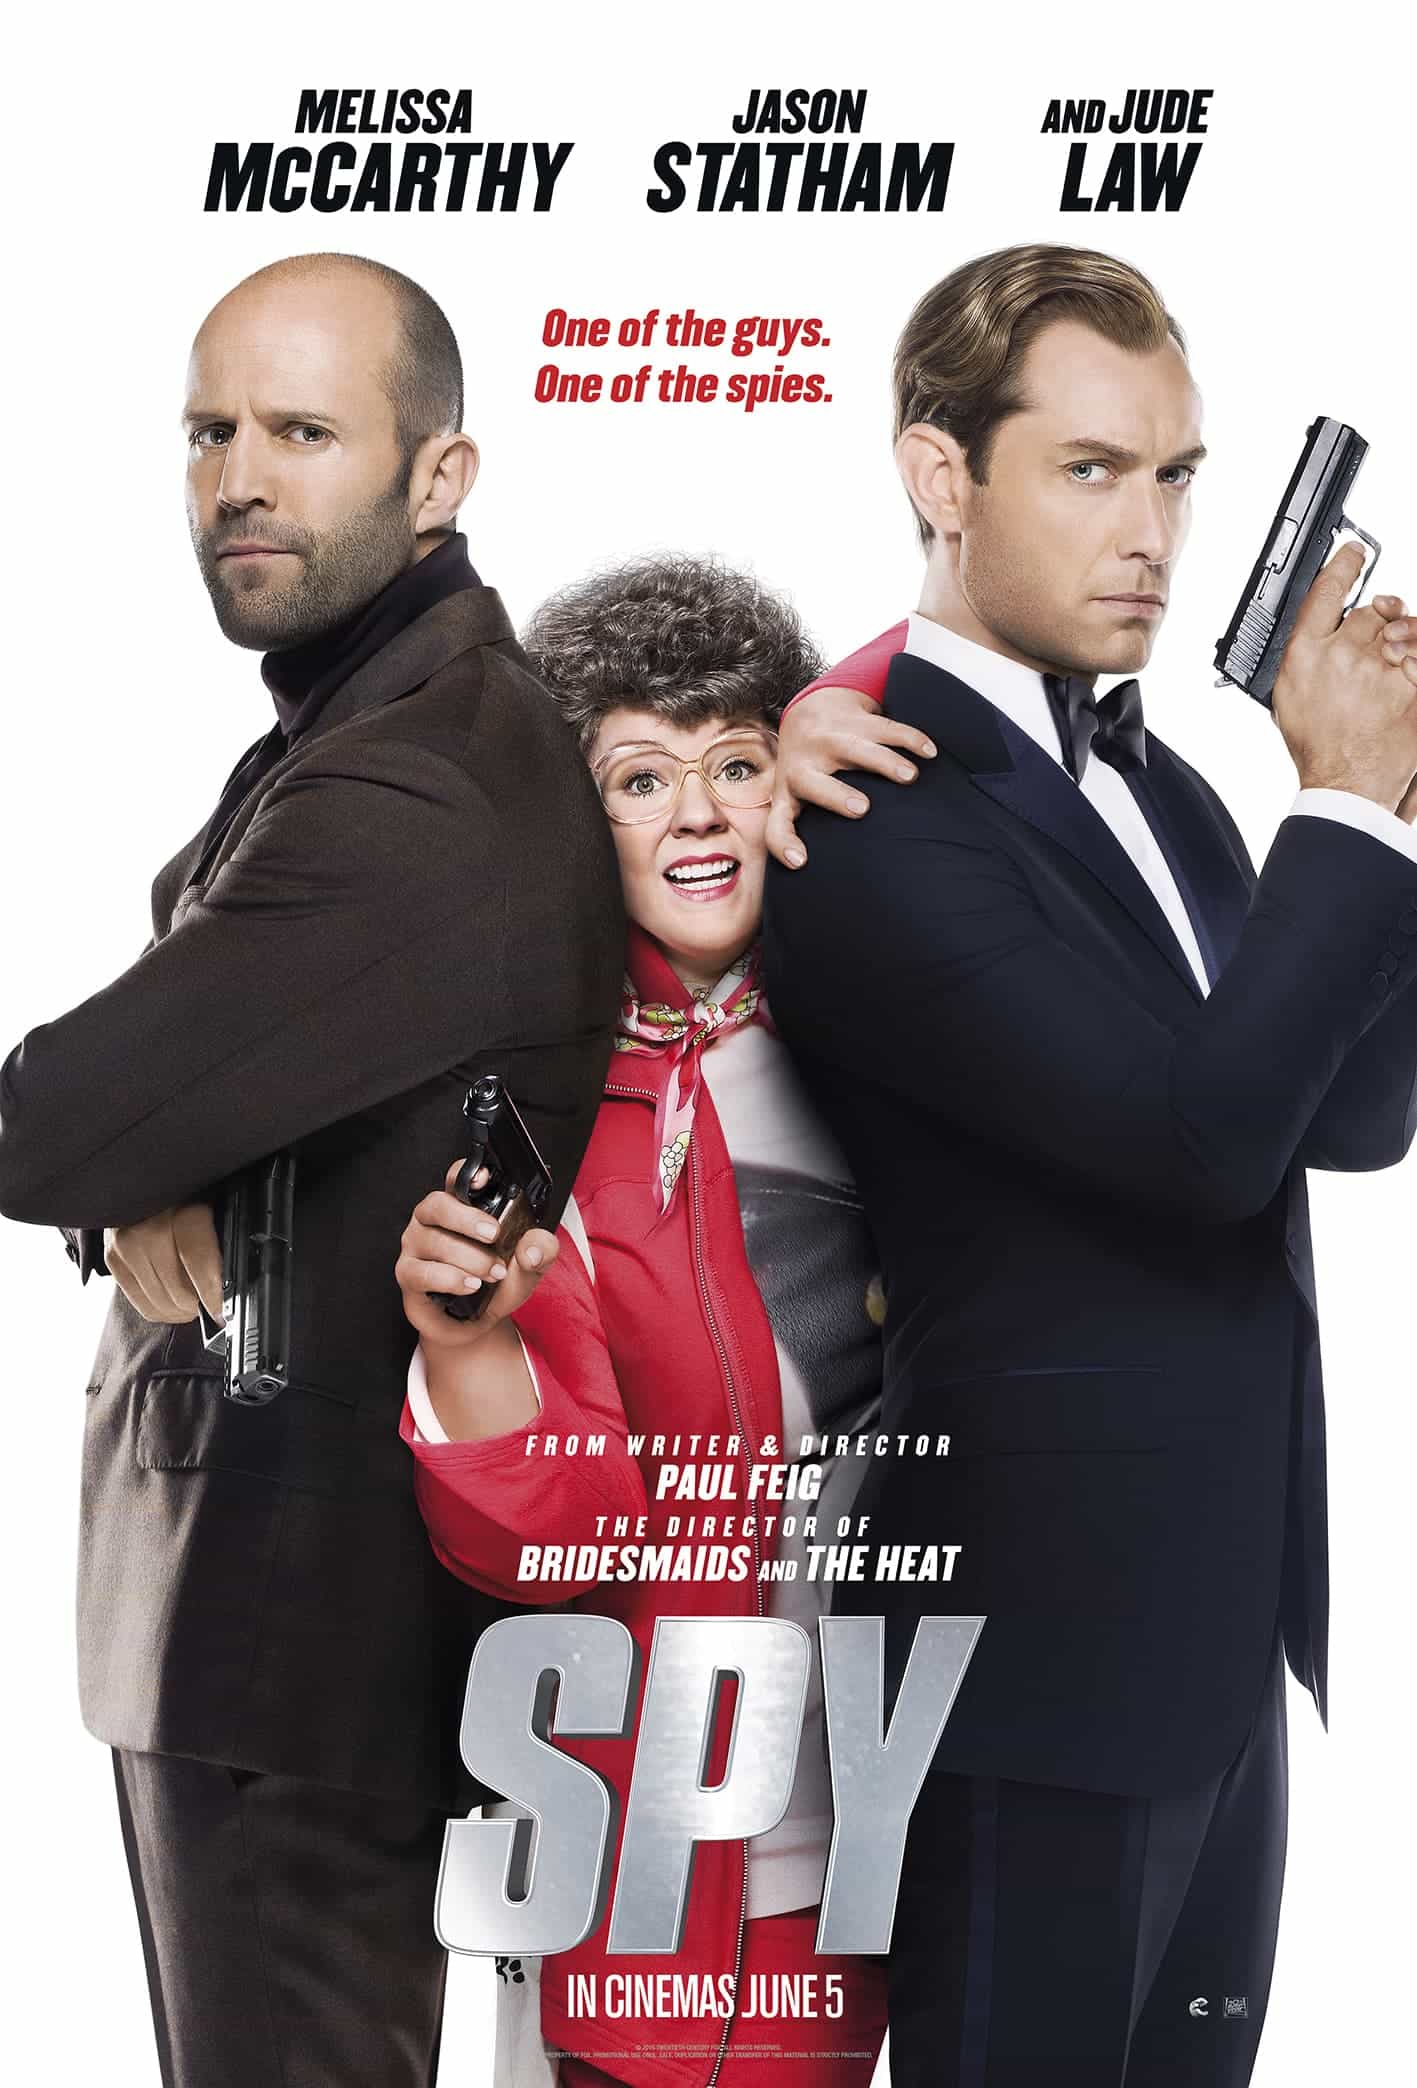 US Box Office Weekend Report 5th - 7th June 2015:  Melissa McCarthy finds the top spot with her new comedy Spy